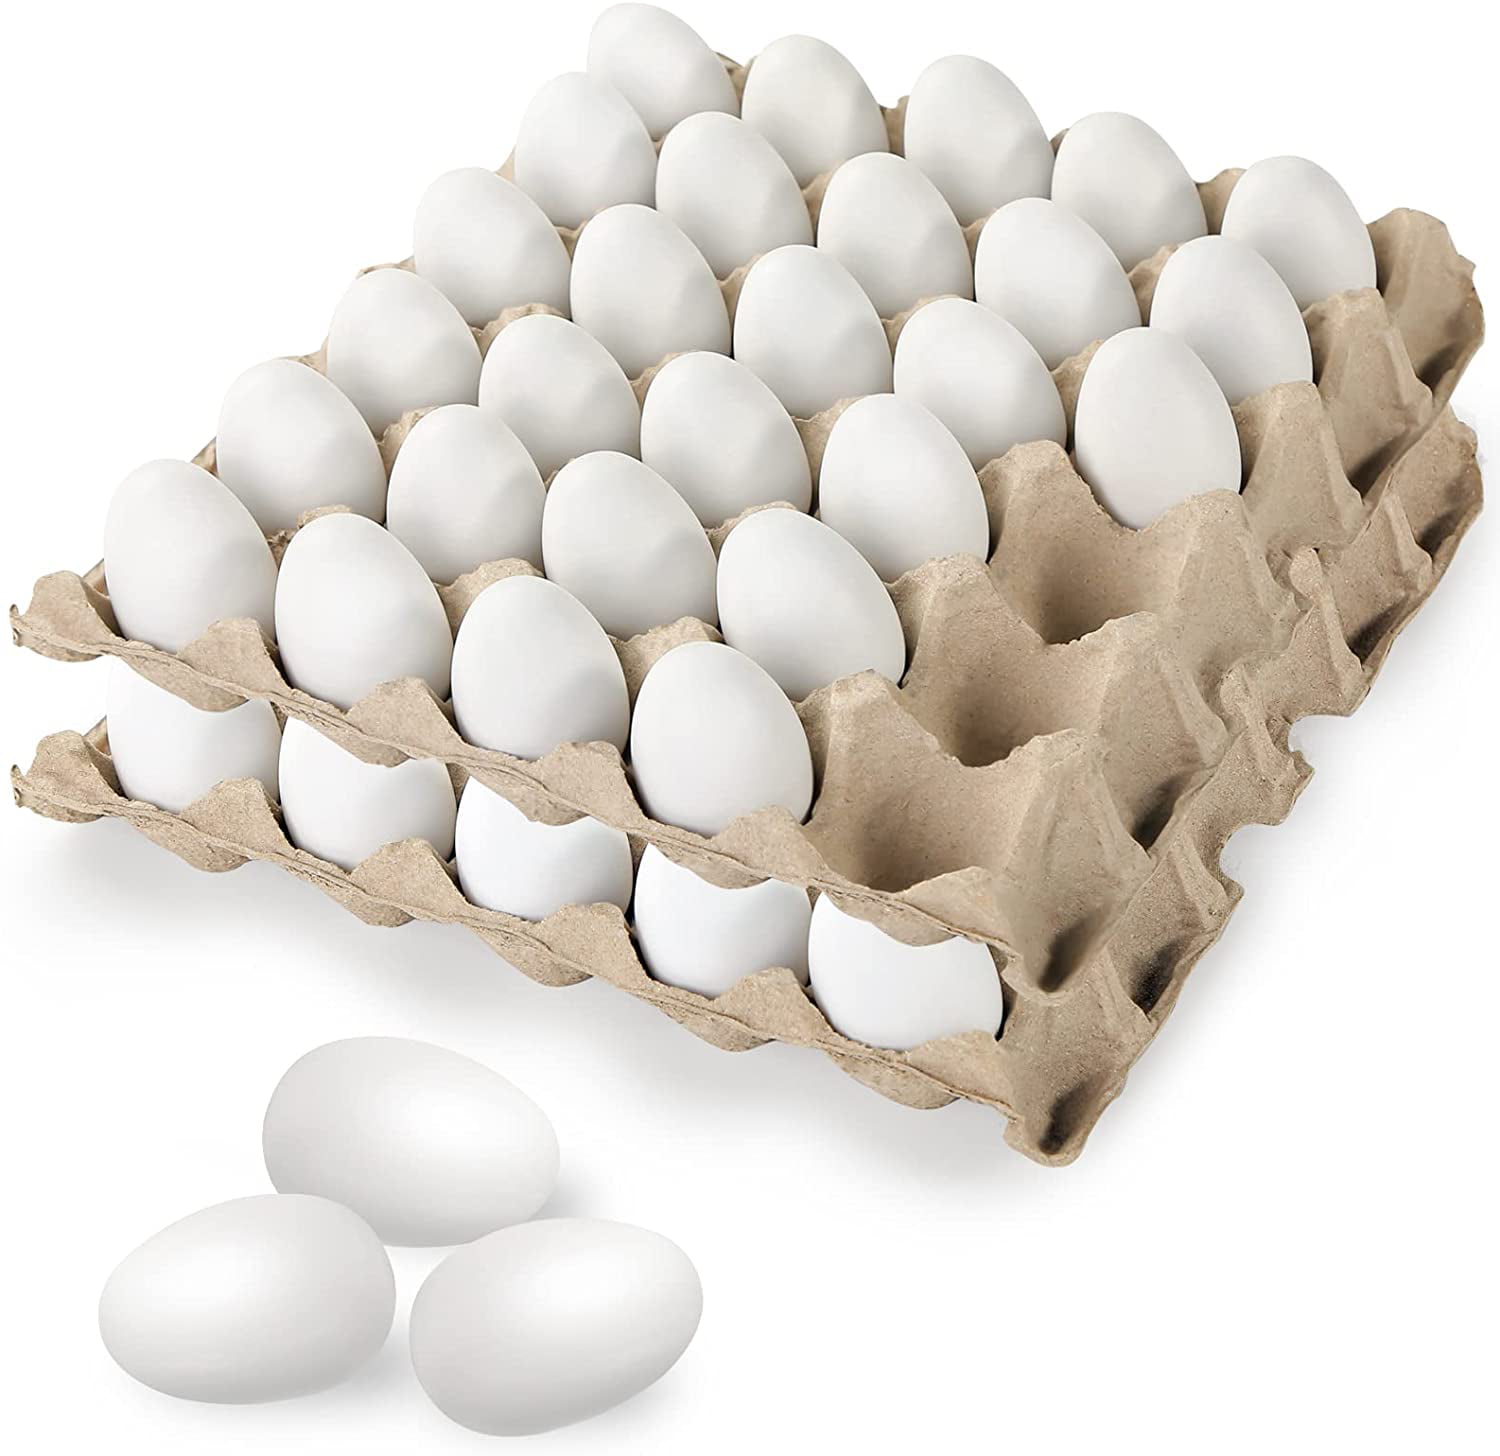 Realistic Egg Toy Food Playset For Kids 30 Fake Chicken Eggs On Tray 